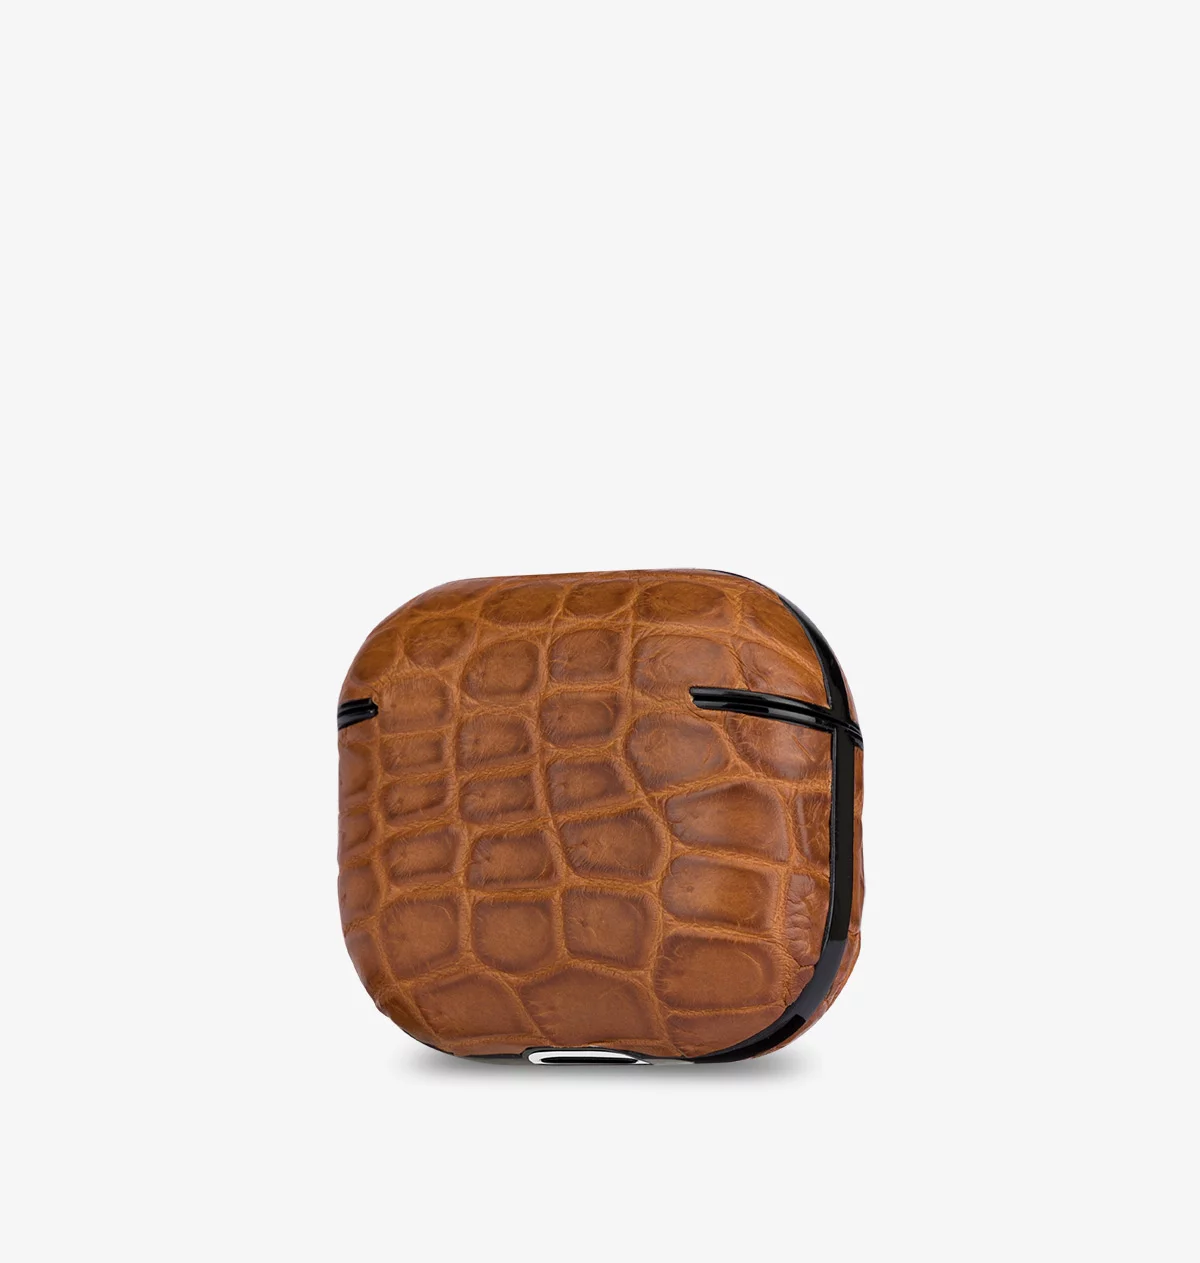 Airpods_Light_Brown-4